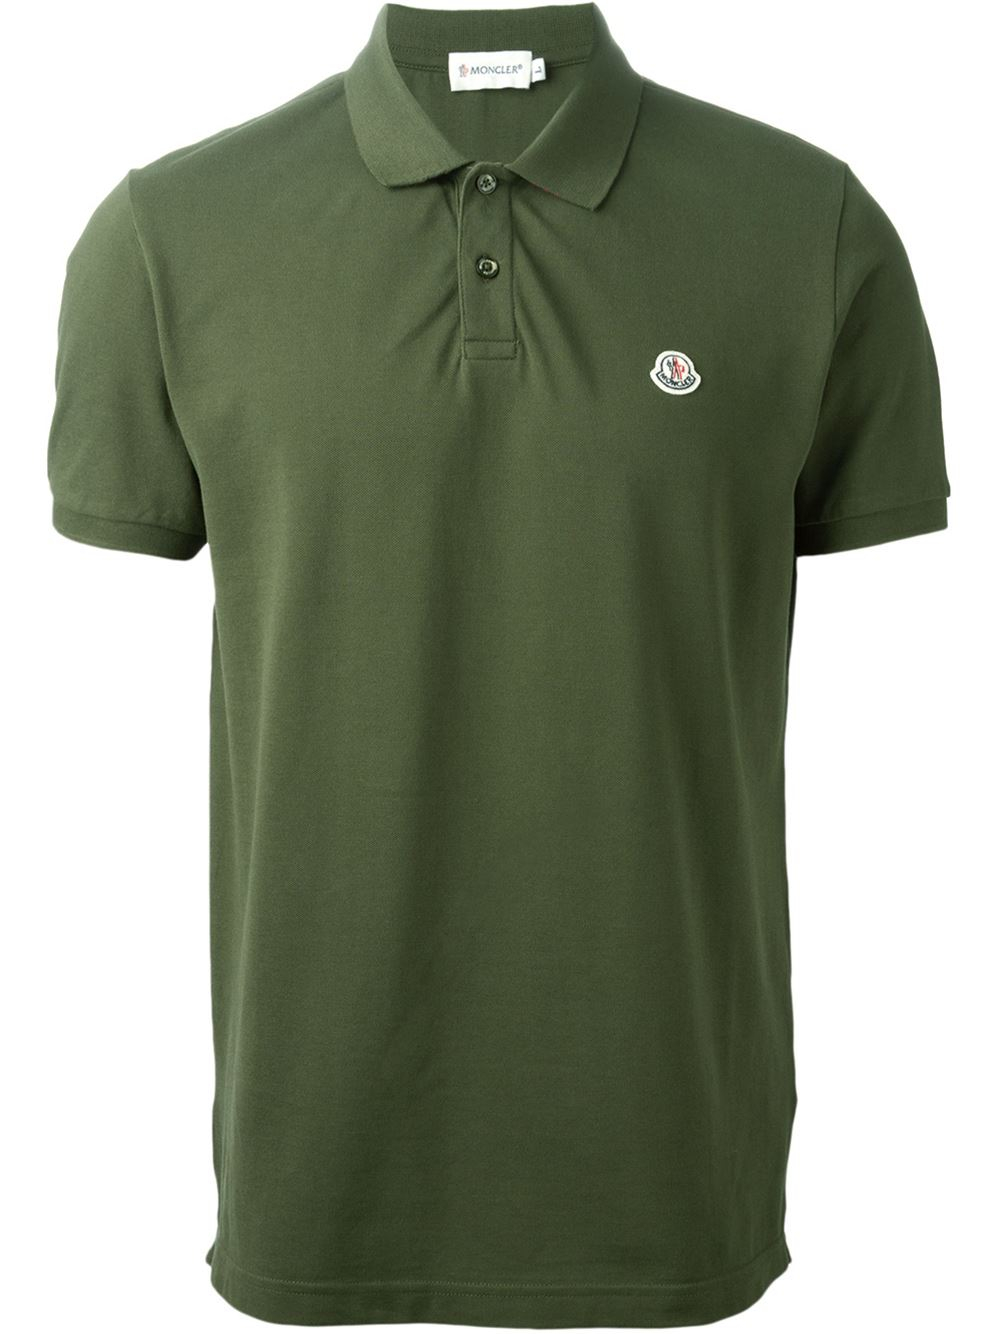 Lyst - Moncler Classic Polo Shirt in Green for Men